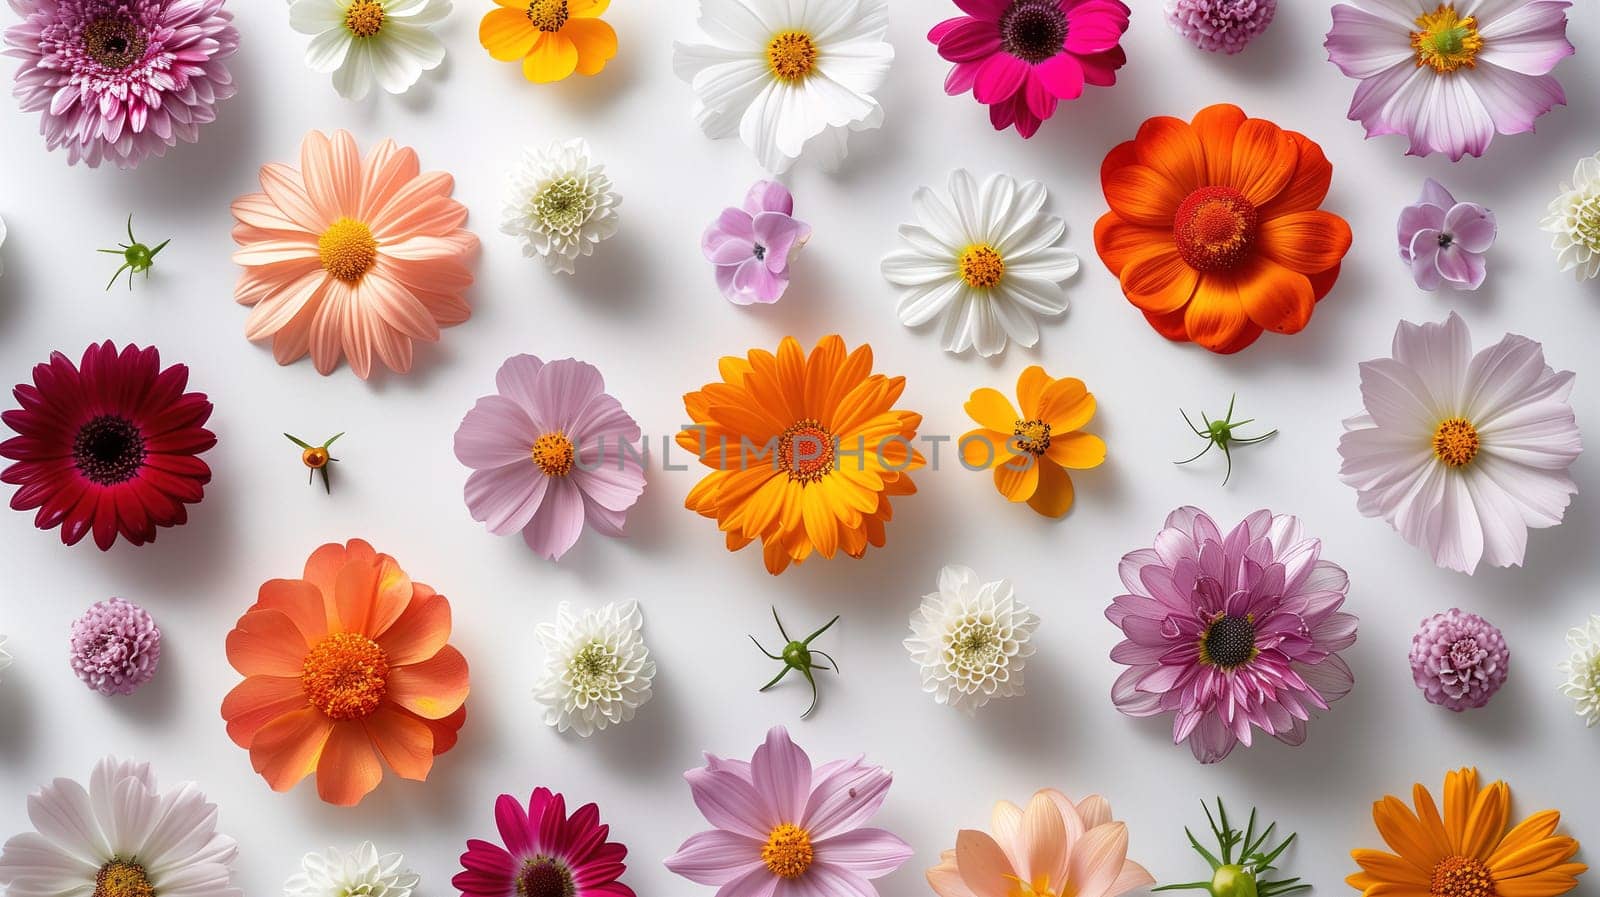 A variety of different colored flowers are scattered on a white surface, creating a vibrant and colorful scene. Each flower stands out with its unique hue, adding a burst of color to the simple backdrop.